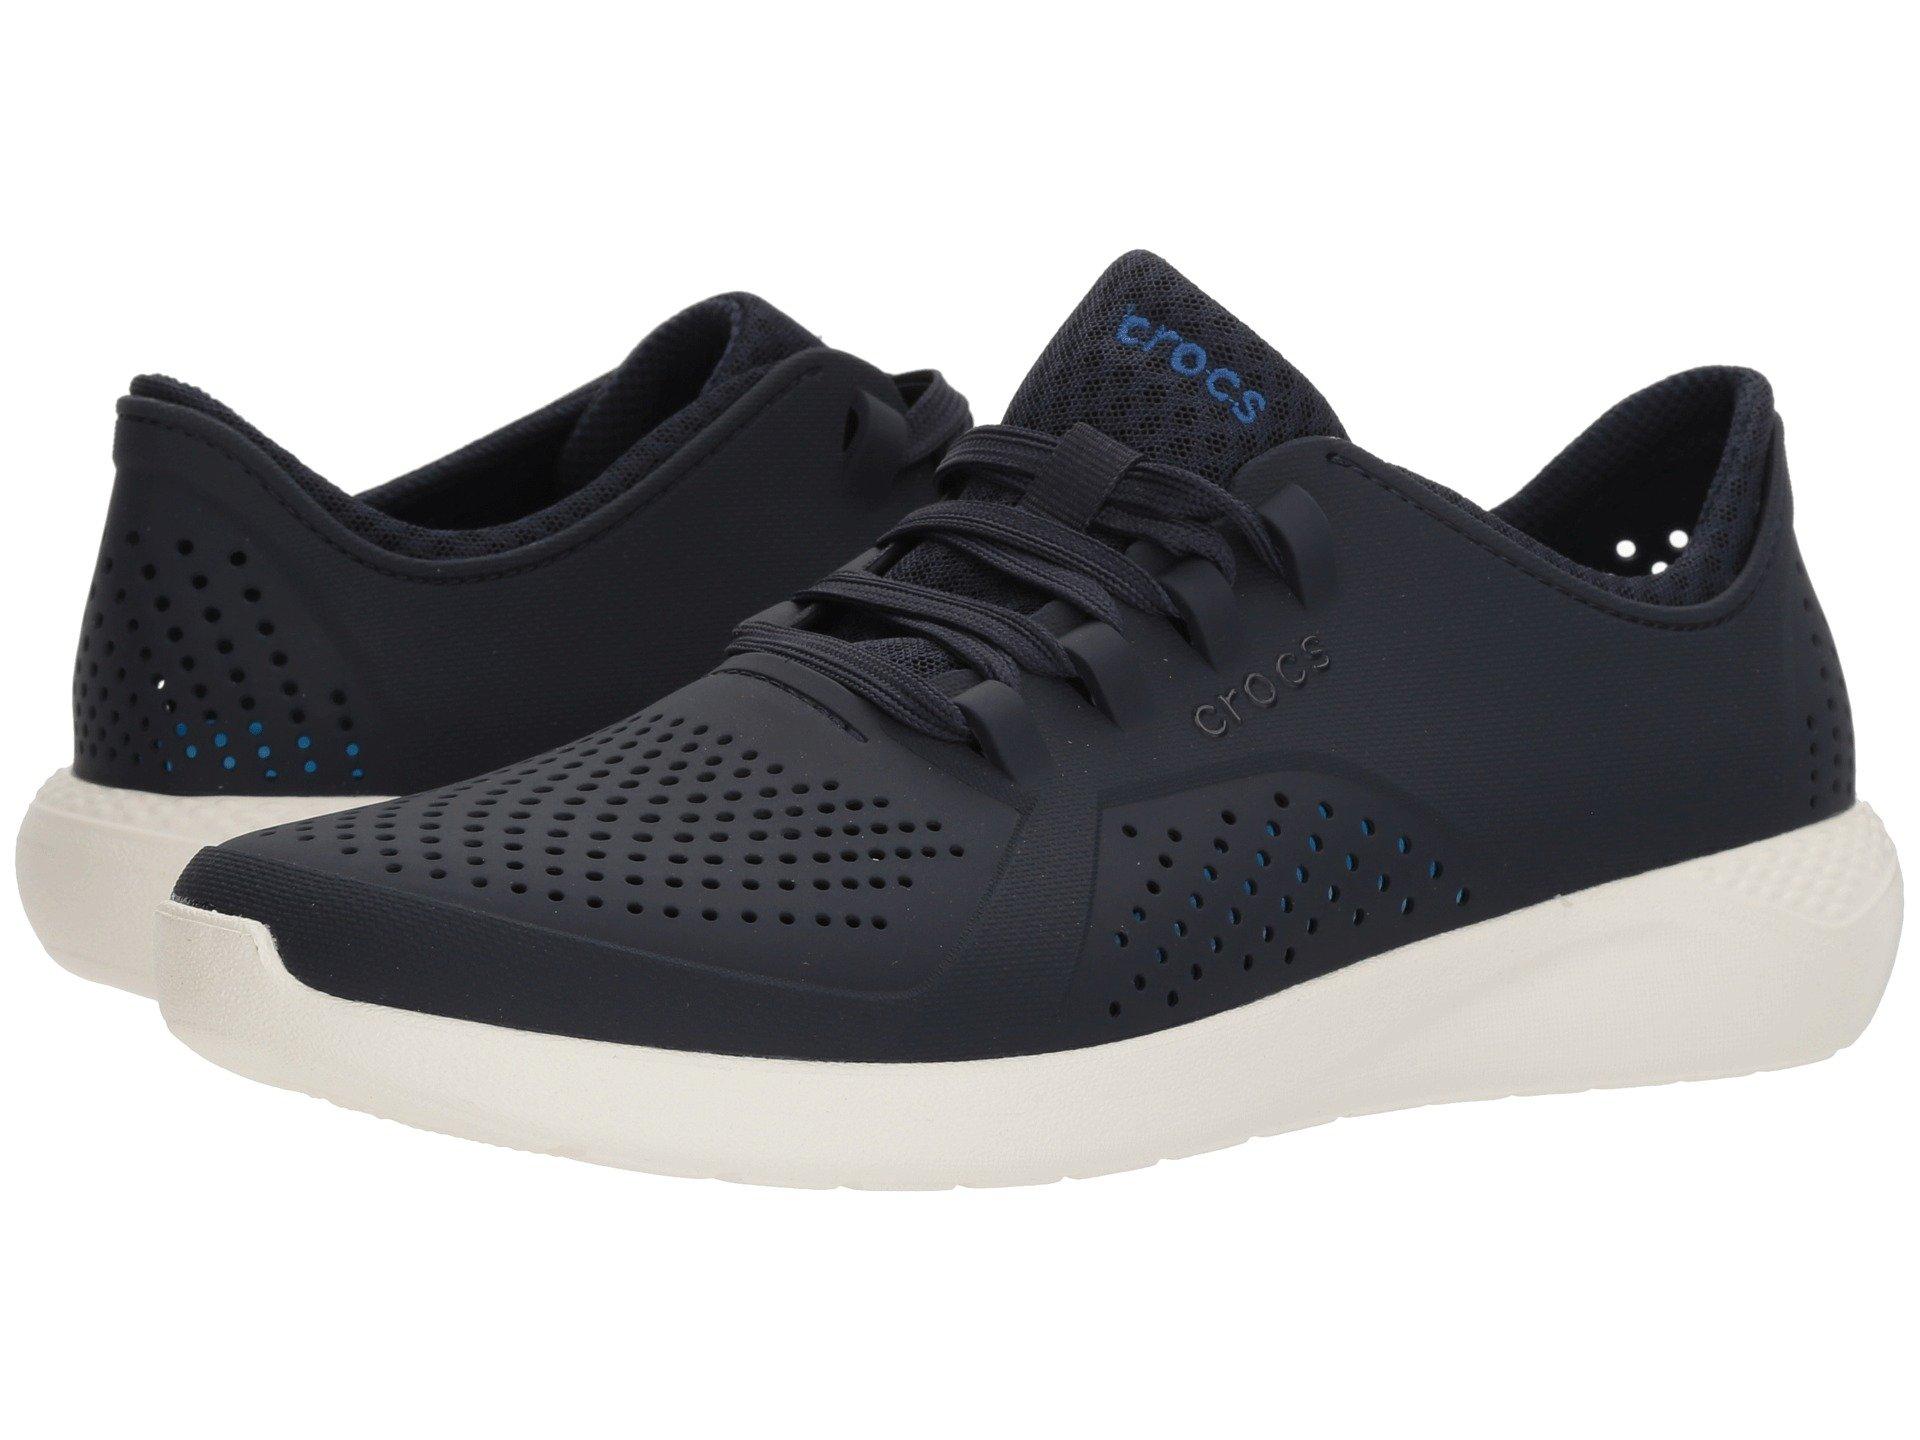 Crocs™ Literide Pacer in Navy/White (Blue) for Men - Save 20% - Lyst